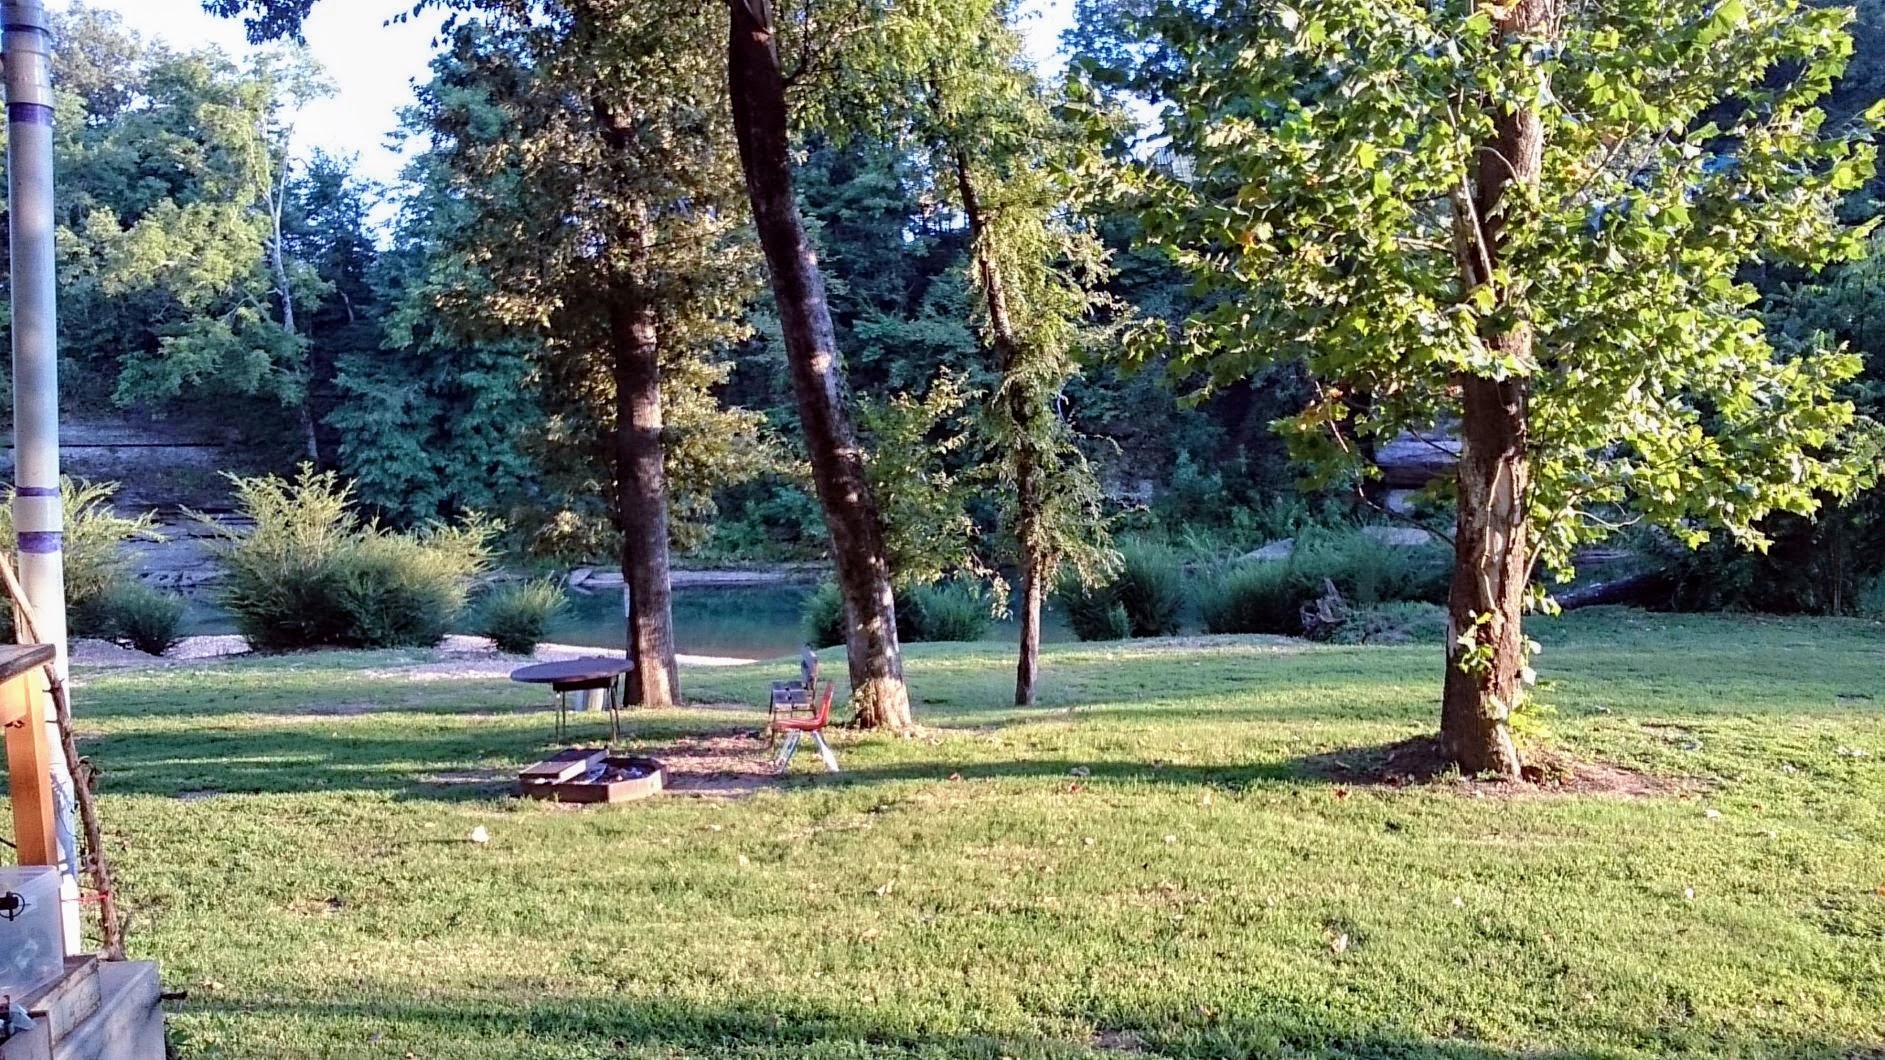 Summertime view of the campground